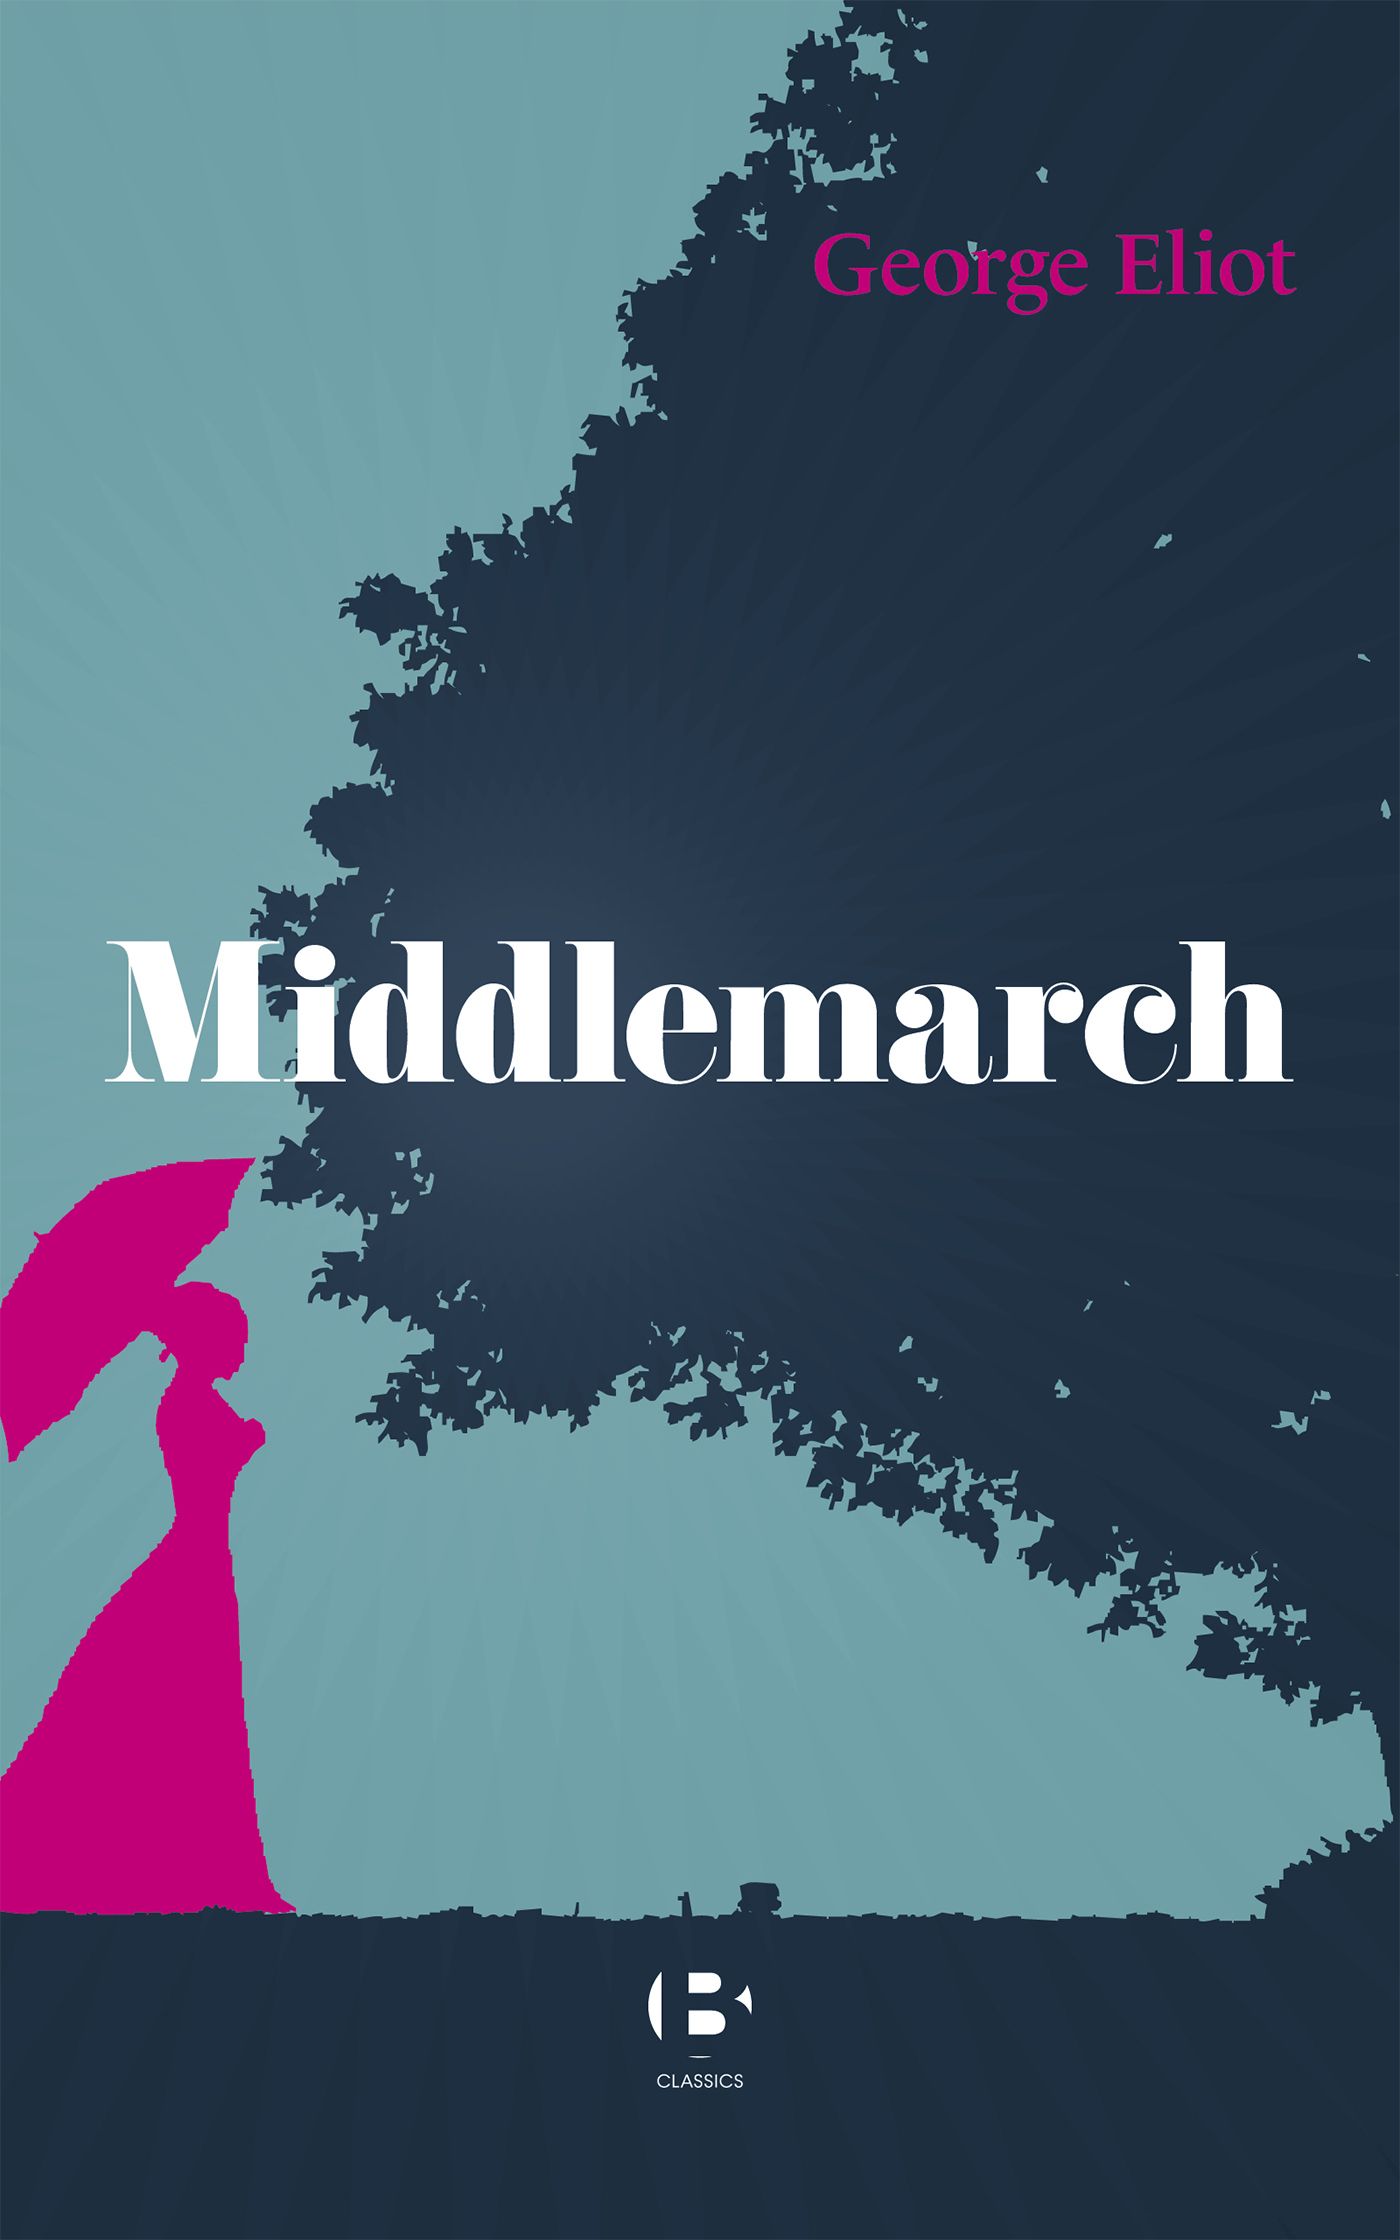 Middlemarch, eBook by George Eliot